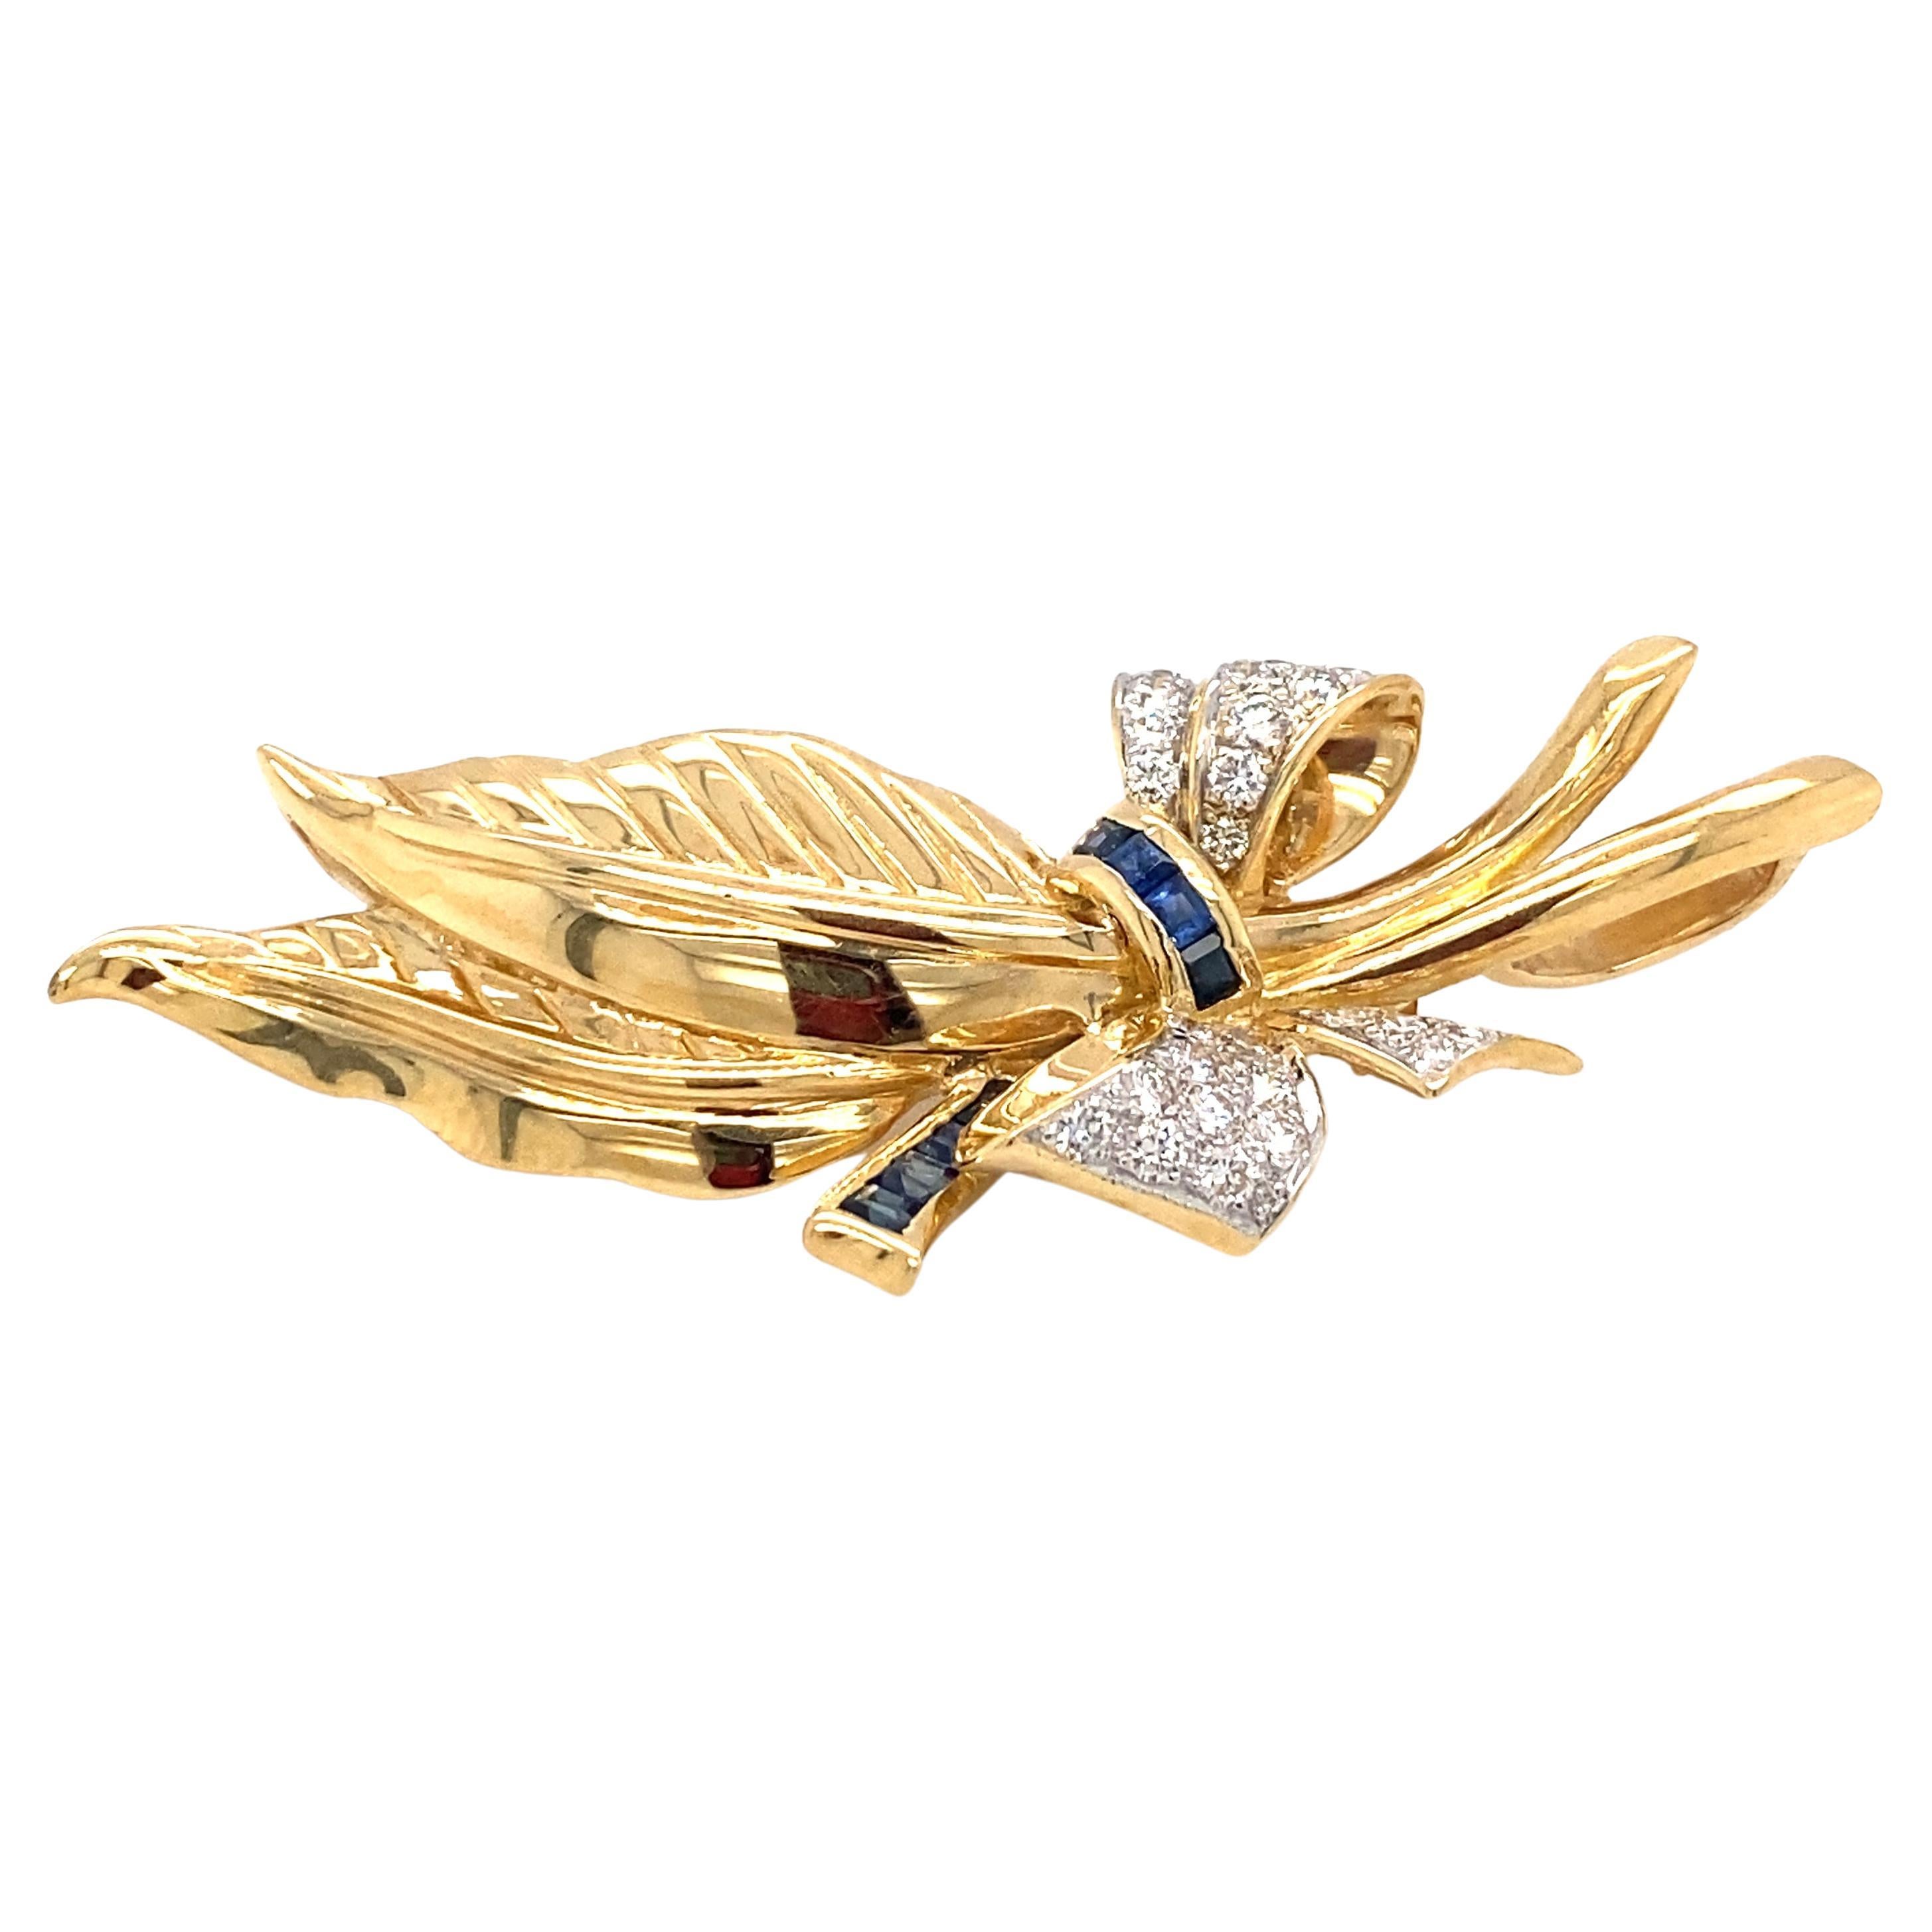 1960s Bow Leaf Pendant Brooch with Diamonds and Sapphires in 18 Karat Gold